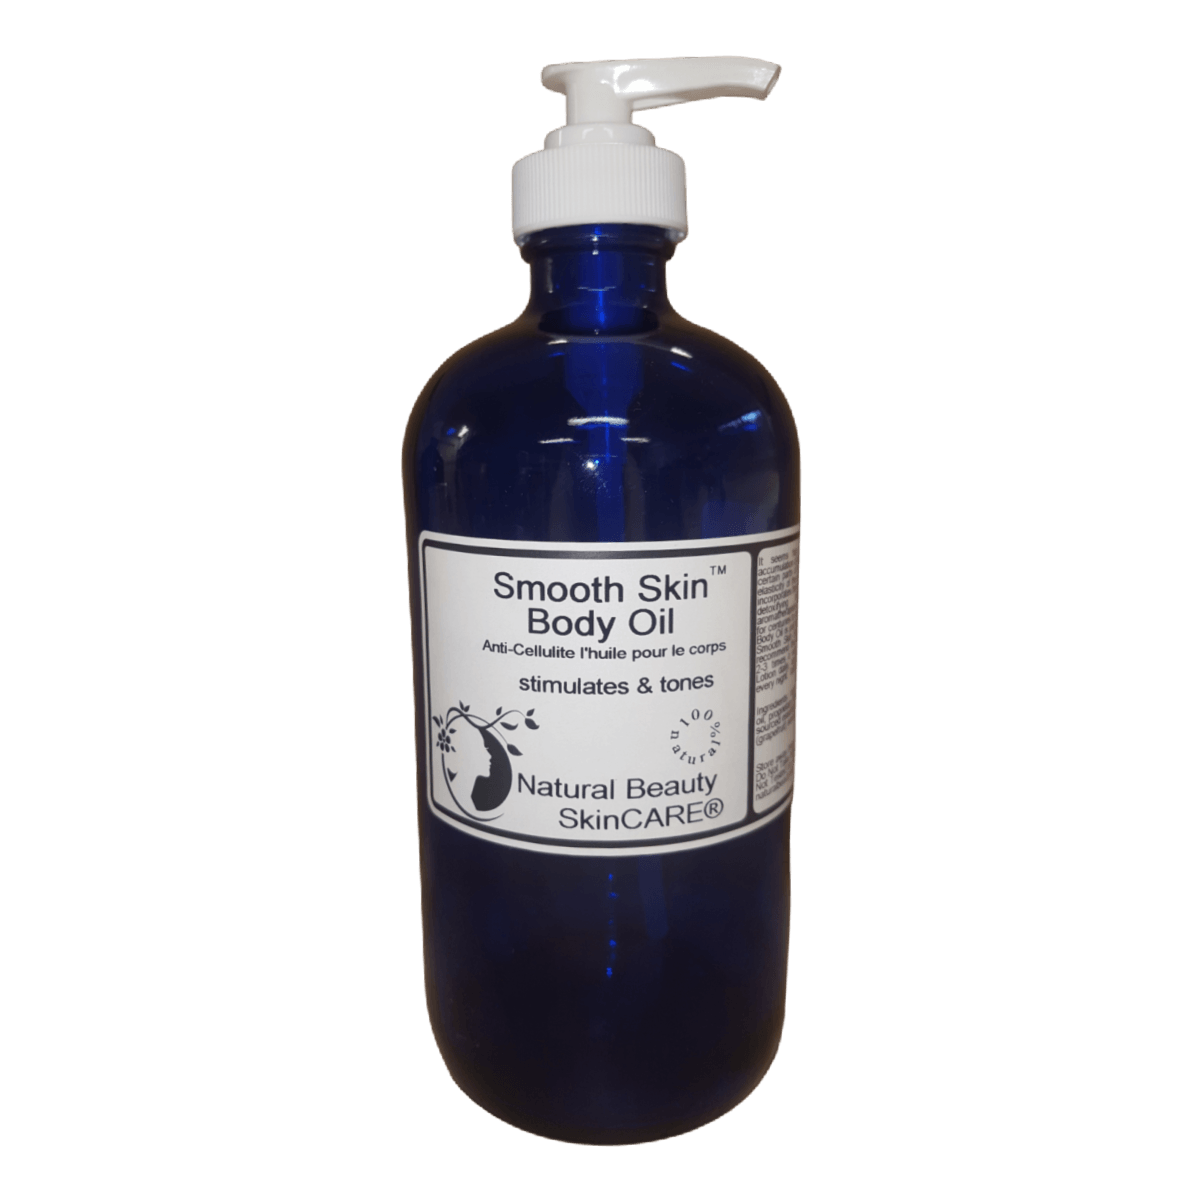 Smooth Skin™ Body Oil - Step #2 - Natural Beauty Skincare® by Nature's  Creations Aromatherapy